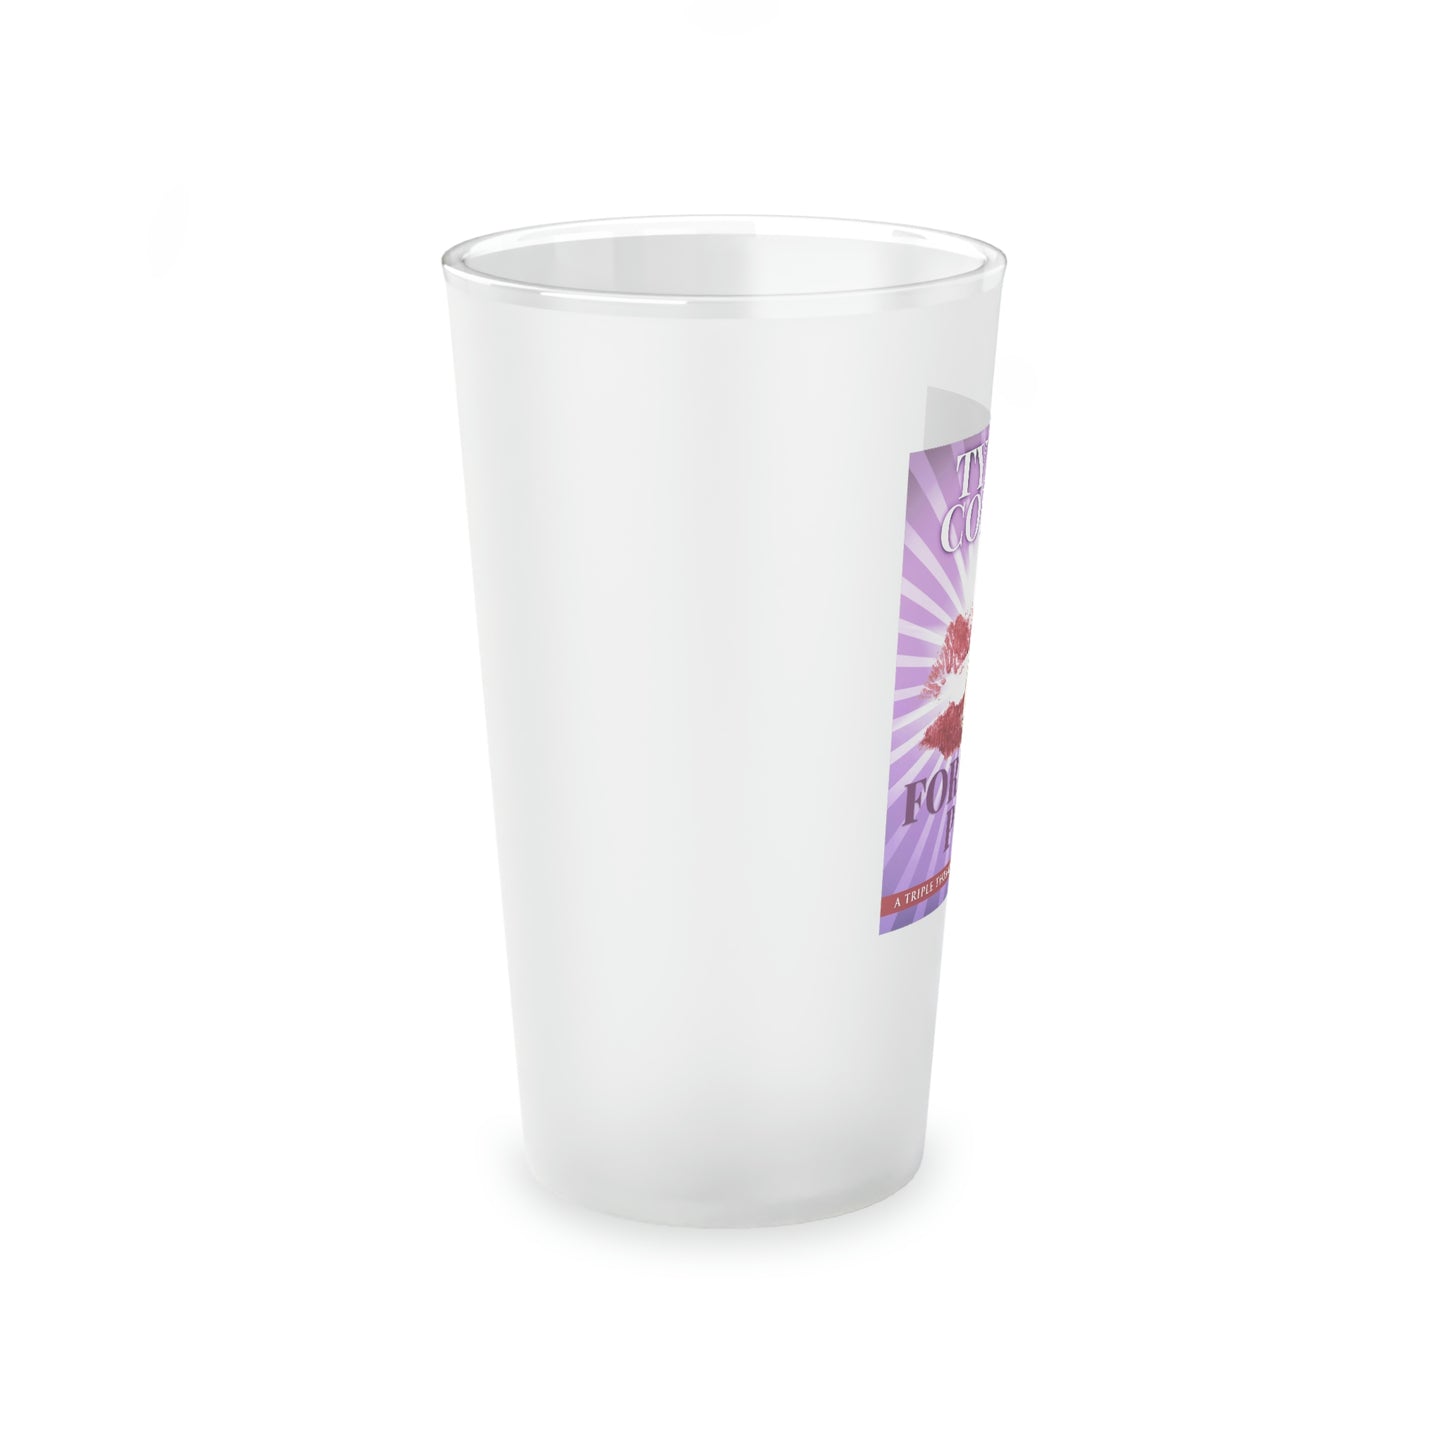 Forever Poi - Frosted Pint Glass